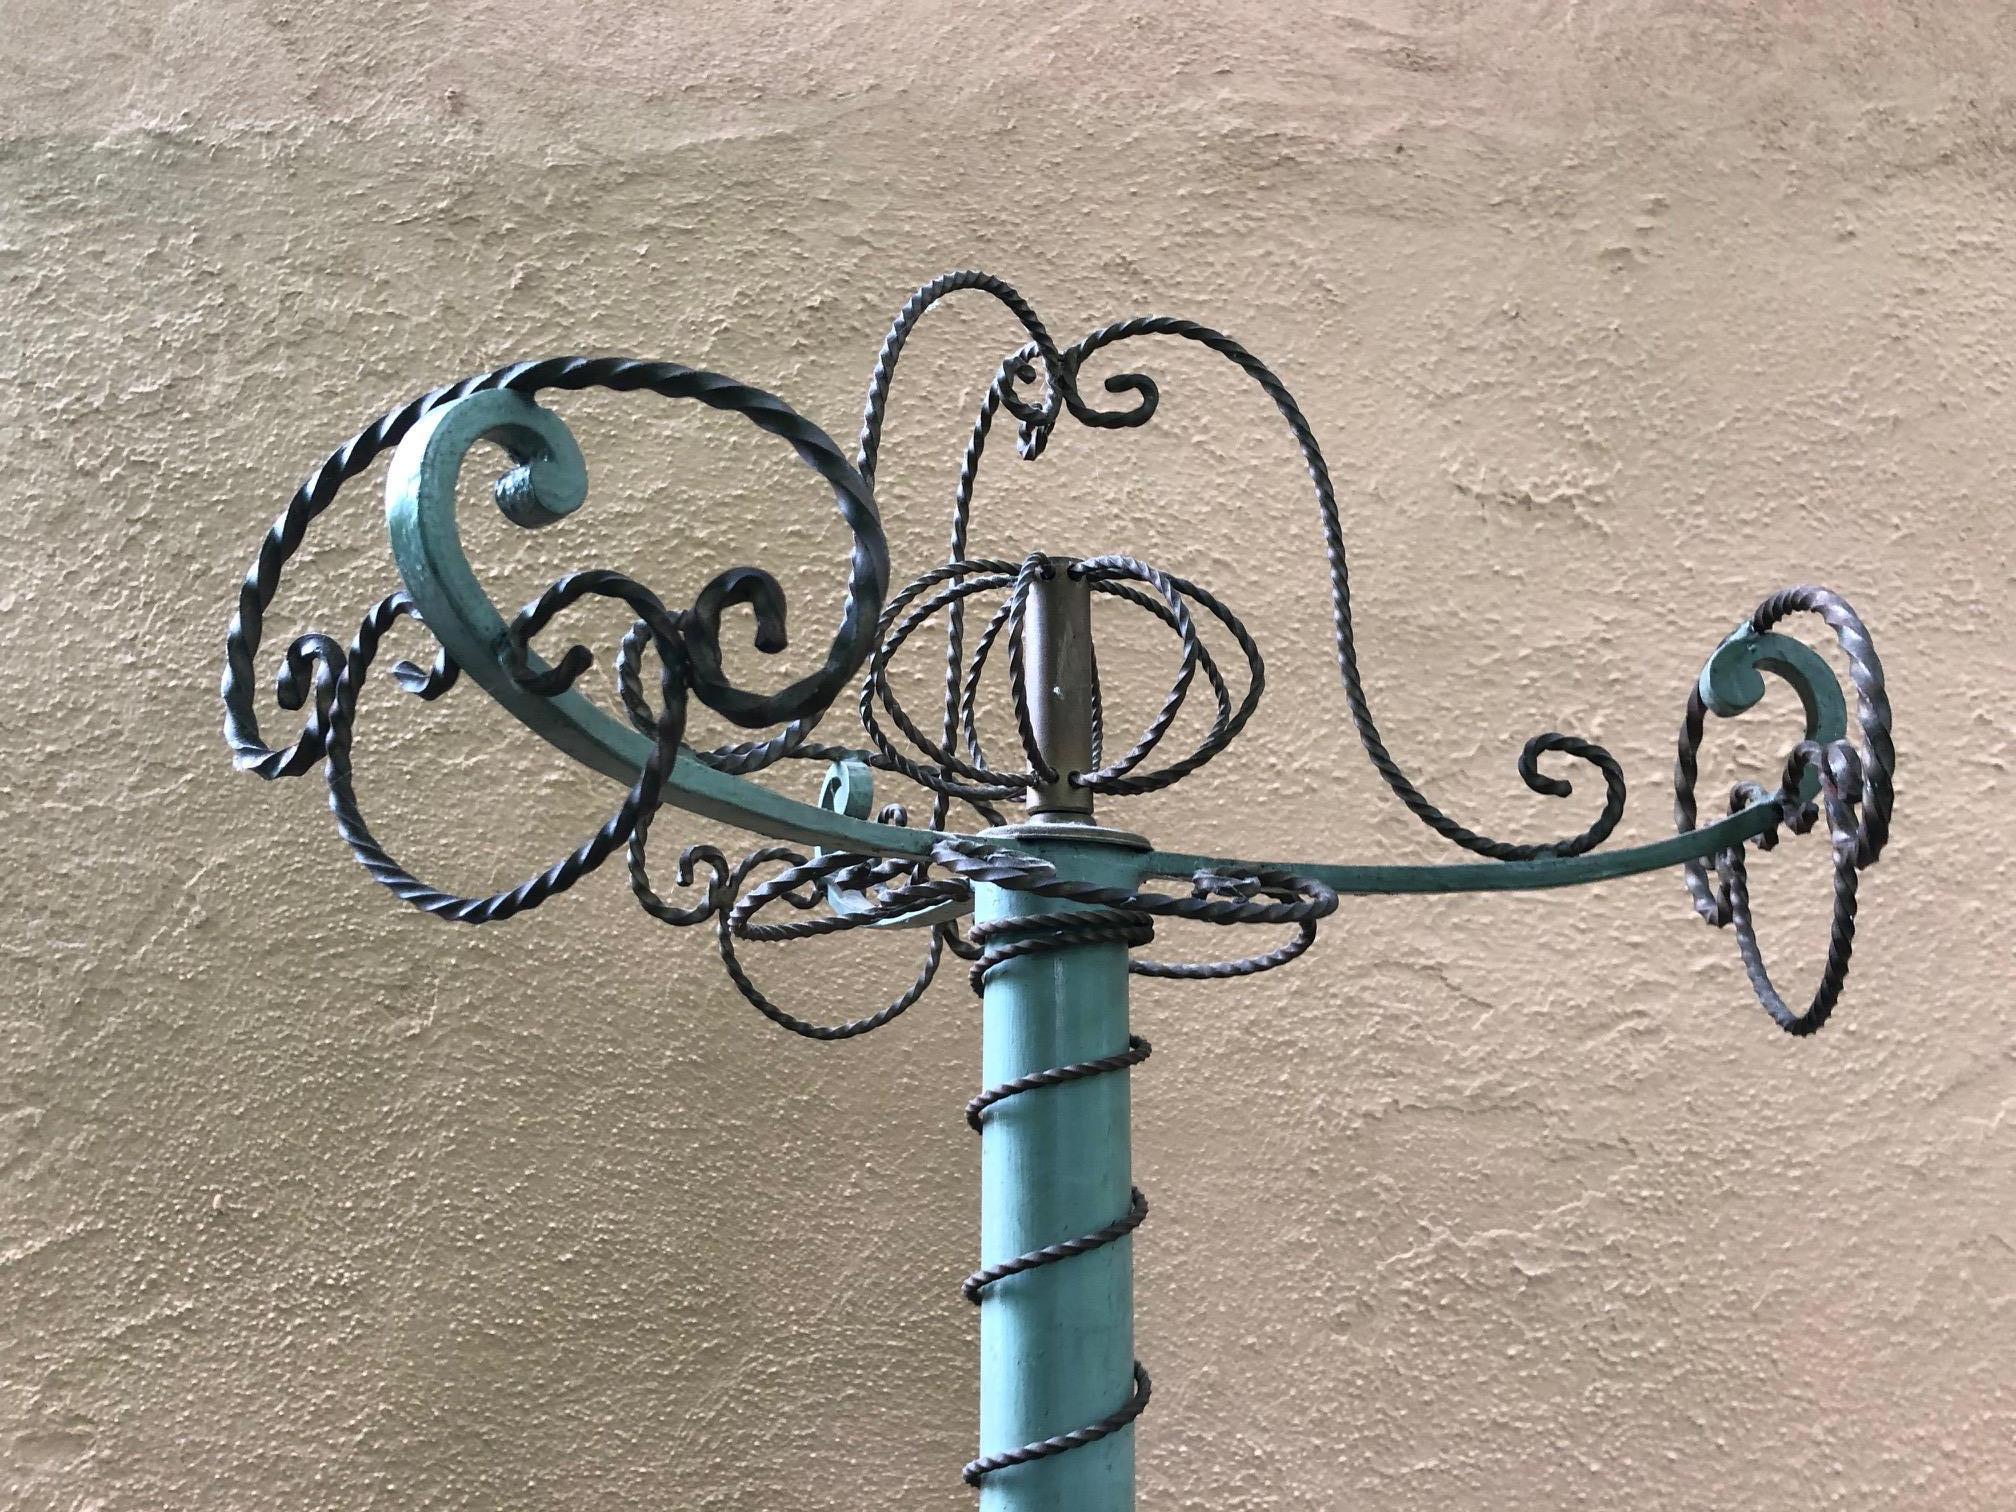 Vintage coat rack having a celadon painted column and old curlicue iron decoration and places for hanging jackets.
Top is 17.5 diameter.
Bottom 22 diameter.